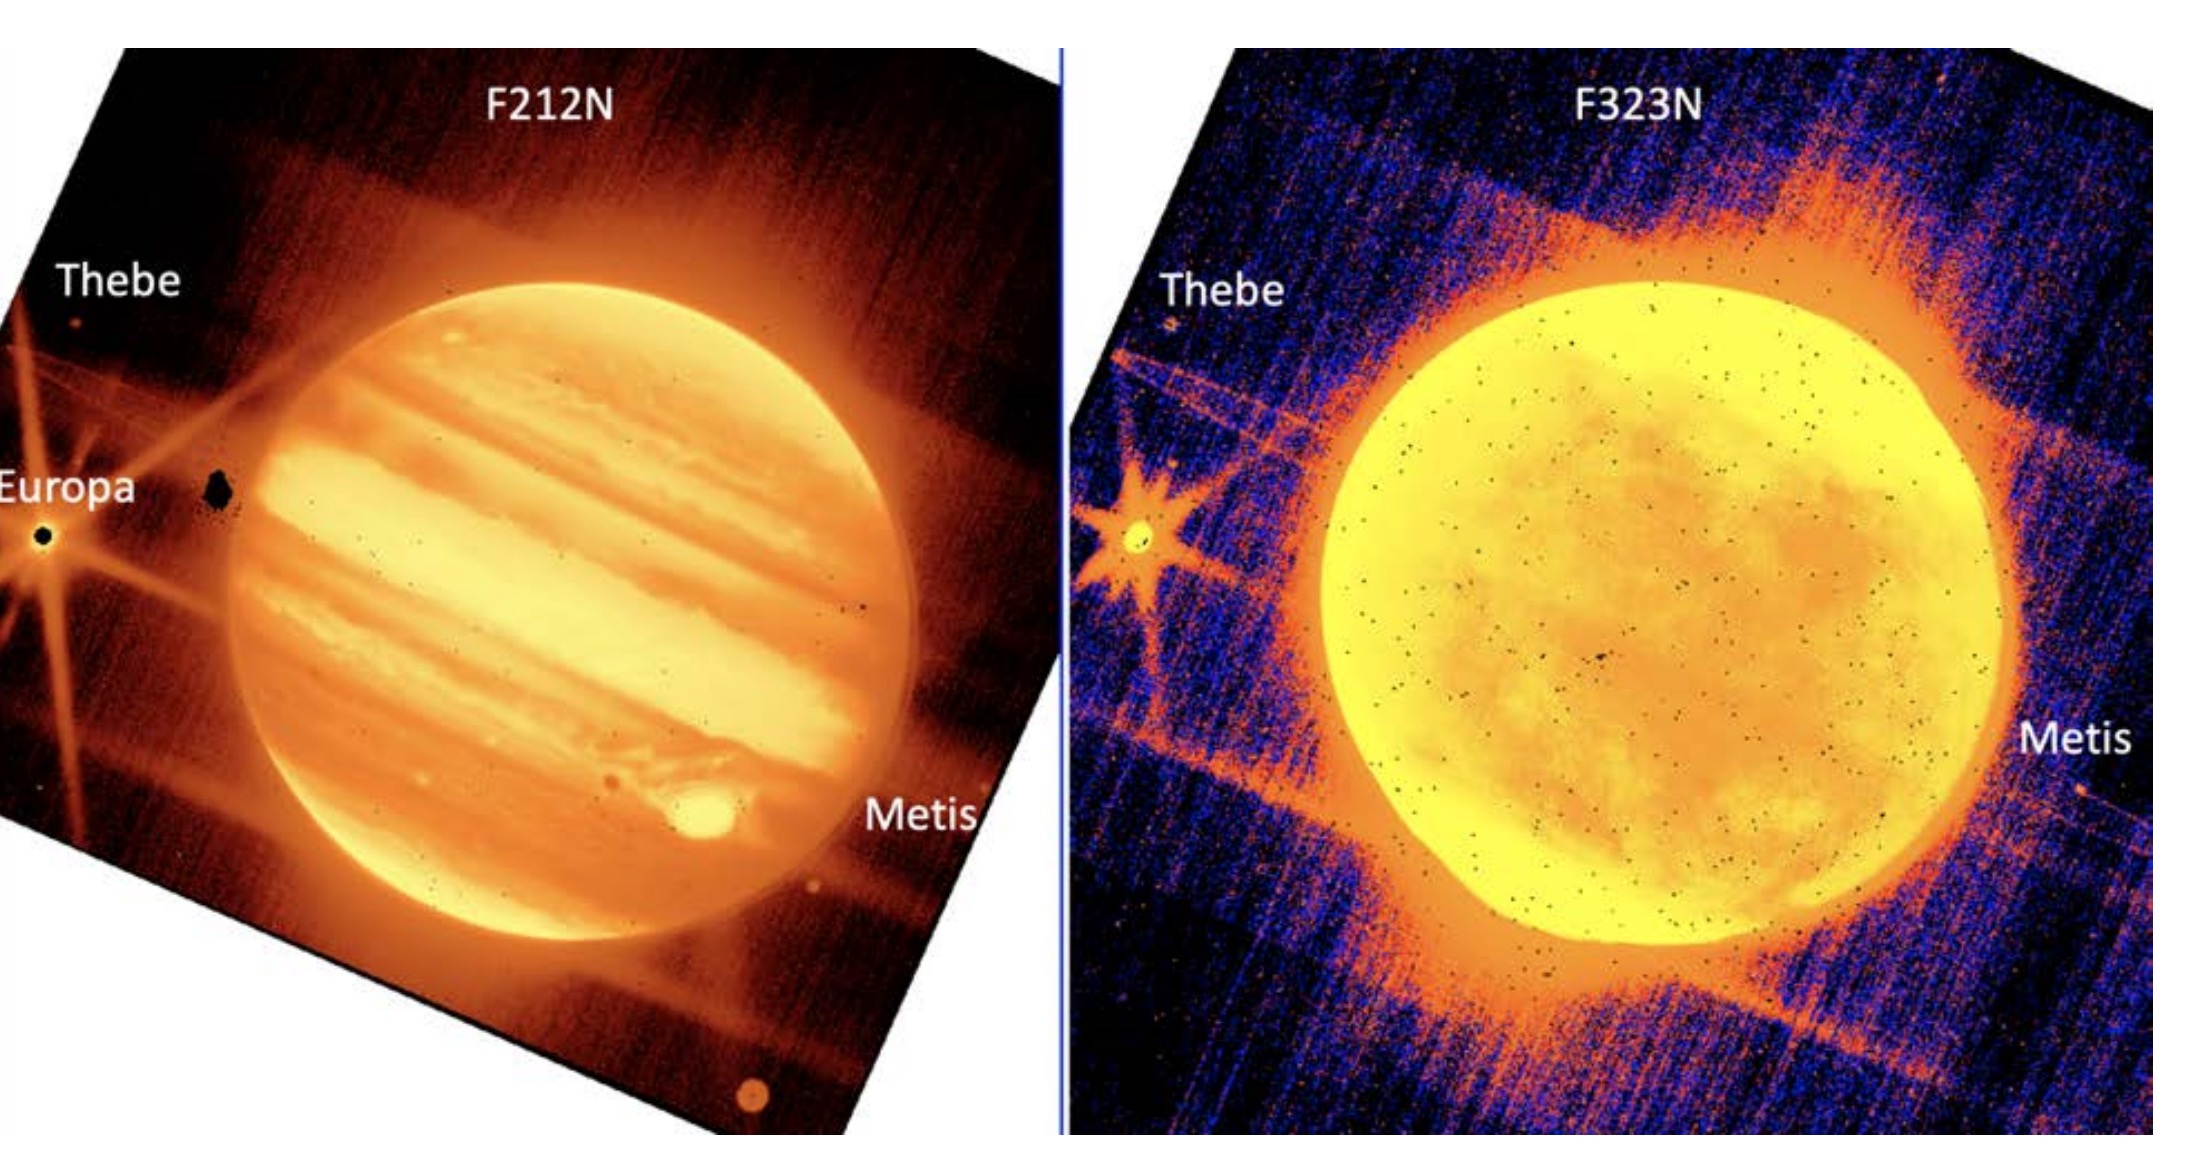 Left: Jupiter and its moons Europa, Thebe and Metis are seen through the 2.12 micron filter of the James Webb Space Telescope's NIRCam instrument.  Right: Jupiter and Europa, Thebes and Metis are seen through NIRCam's 3.23 micron filter.